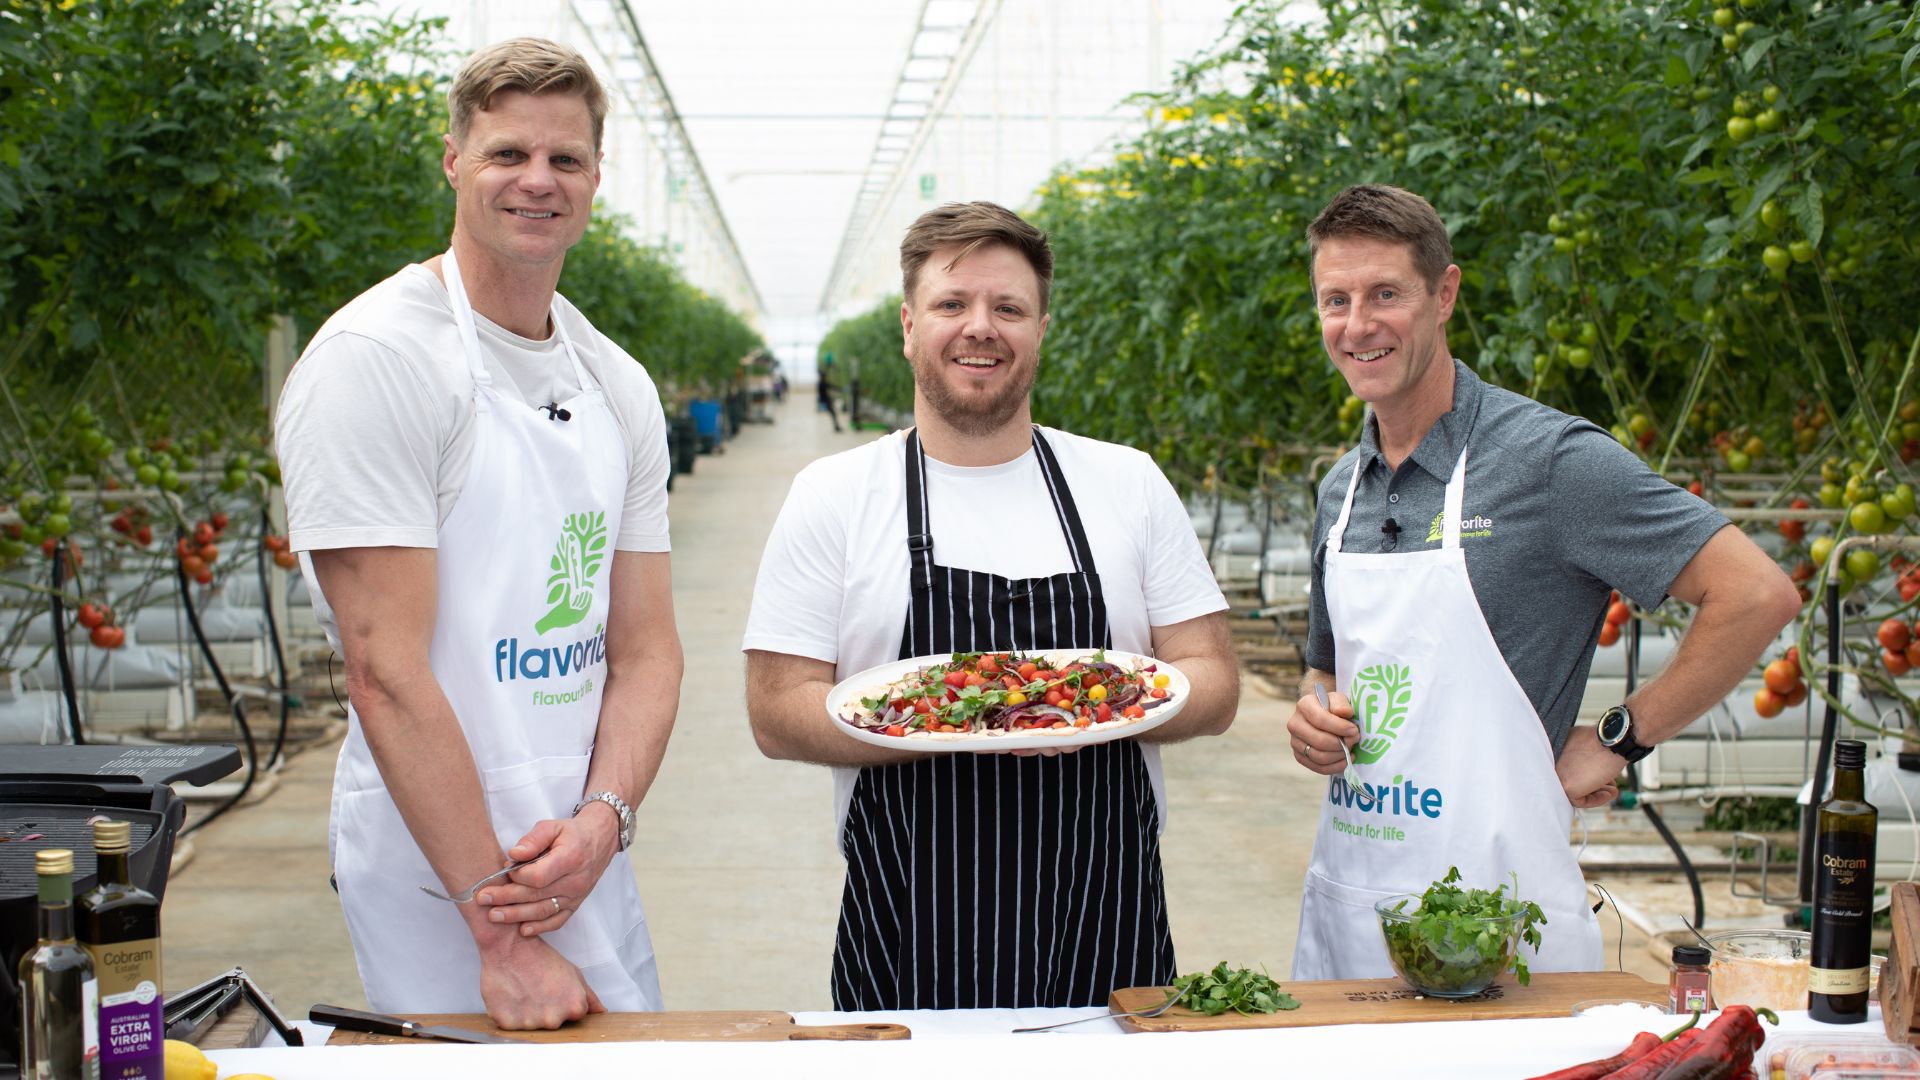 In a glasshouse, Nick Riewoldt stands with Michael Weldon and Chris Millis. Michael is holding a plate of fresh produce.